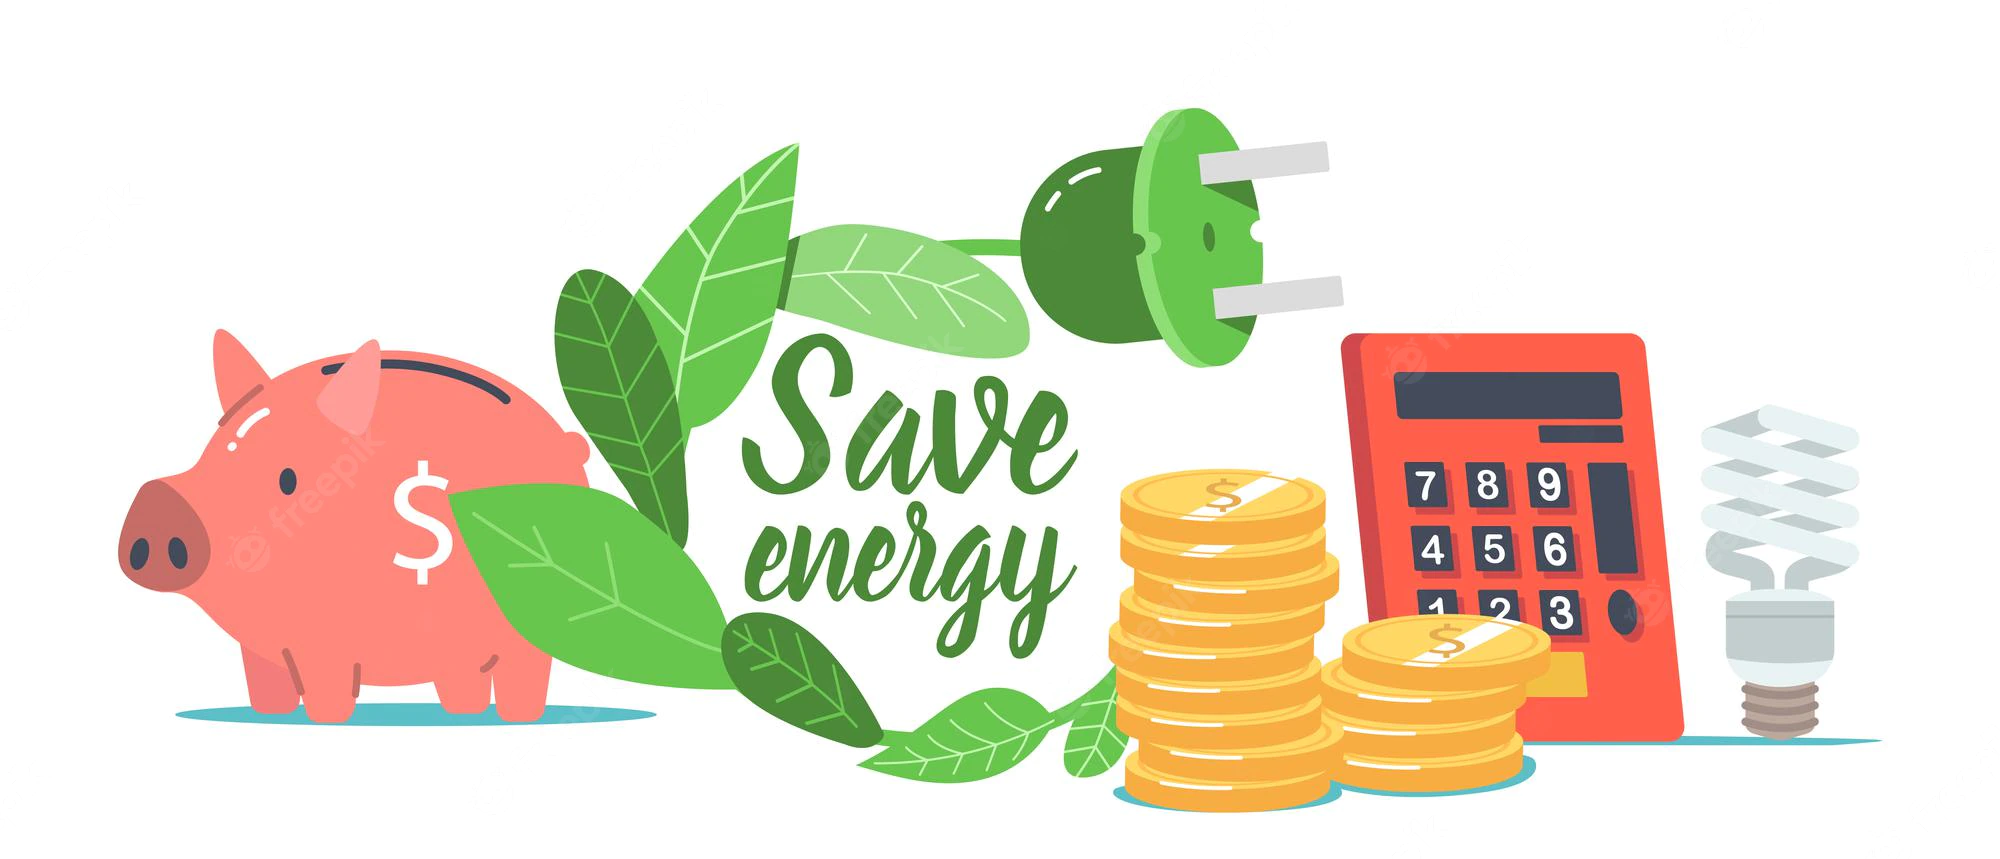 save-energy-environmental-concept-coins-piggy-bank-calculator-green-leaves-with-plug-benefits-energy-saving-eco-lamp-modern-innovation-home-electricity-cartoon-vector-illustration_87771-16143